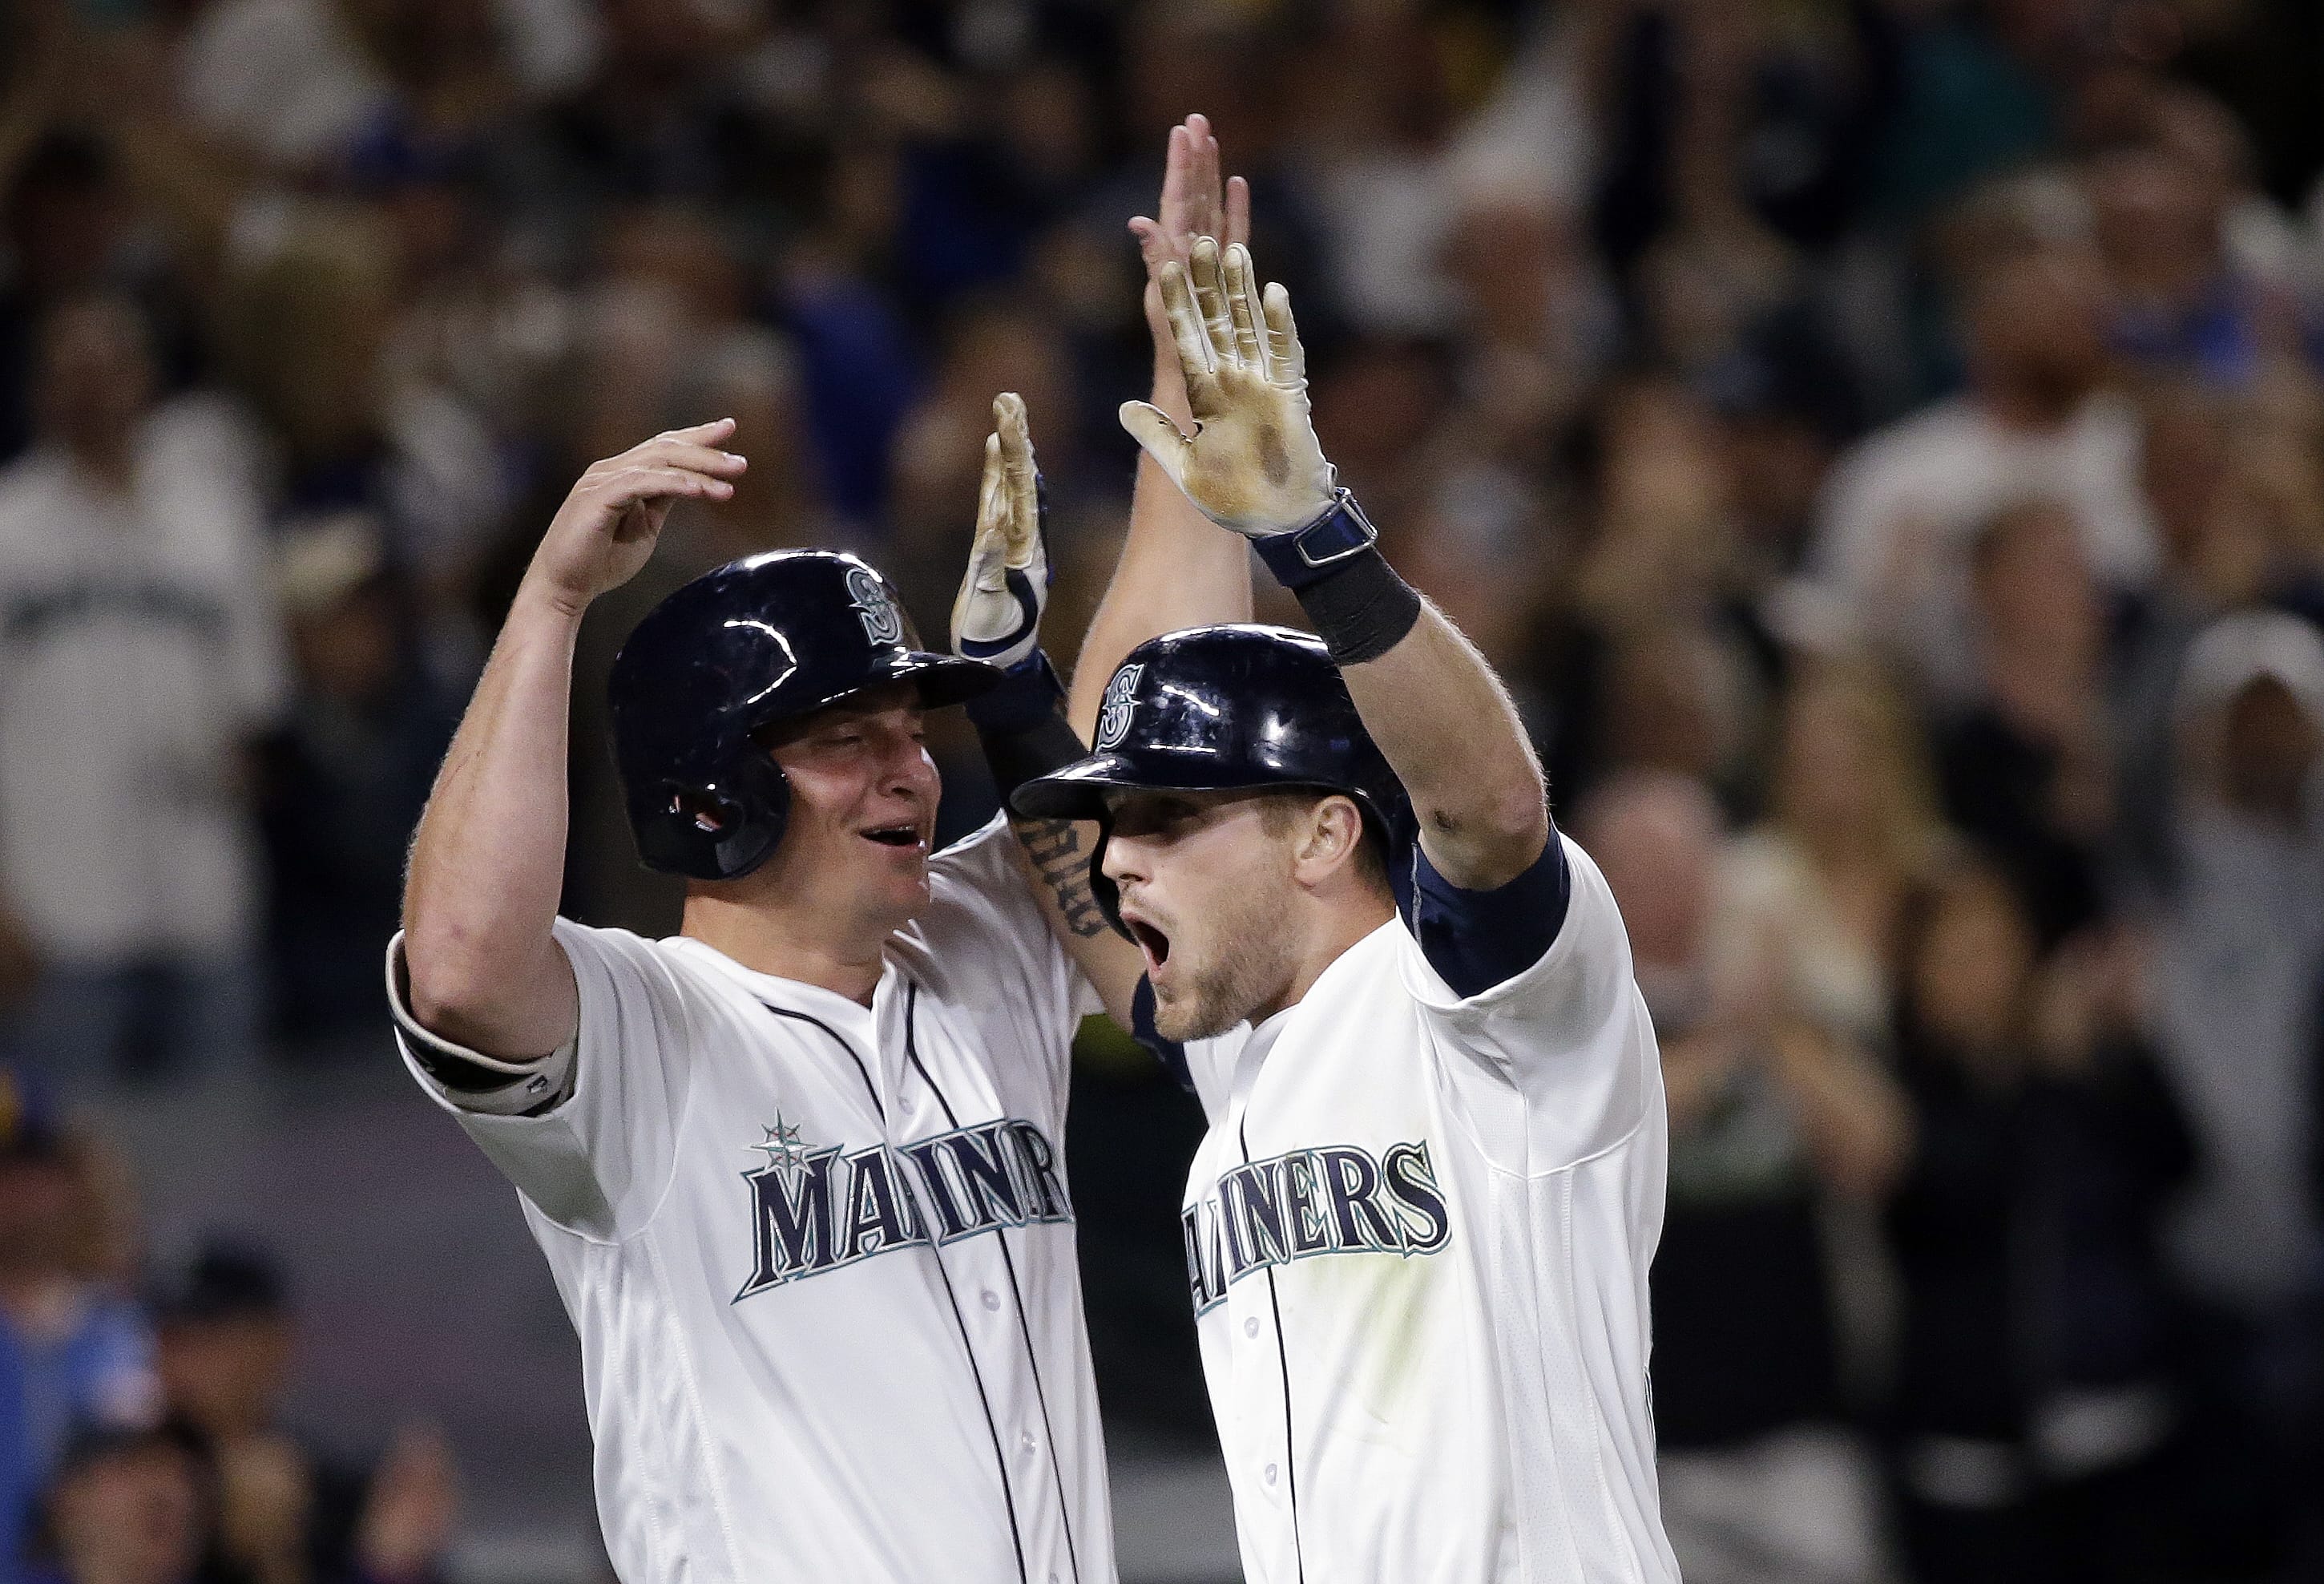 Seattle Mariners' Shawn O'Malley, right, is greeted at home by Kyle Seager after O'Malley's three-run home run against the Los Angeles Angels during the seventh inning of a baseball game Saturday, Aug. 6, 2016, in Seattle.